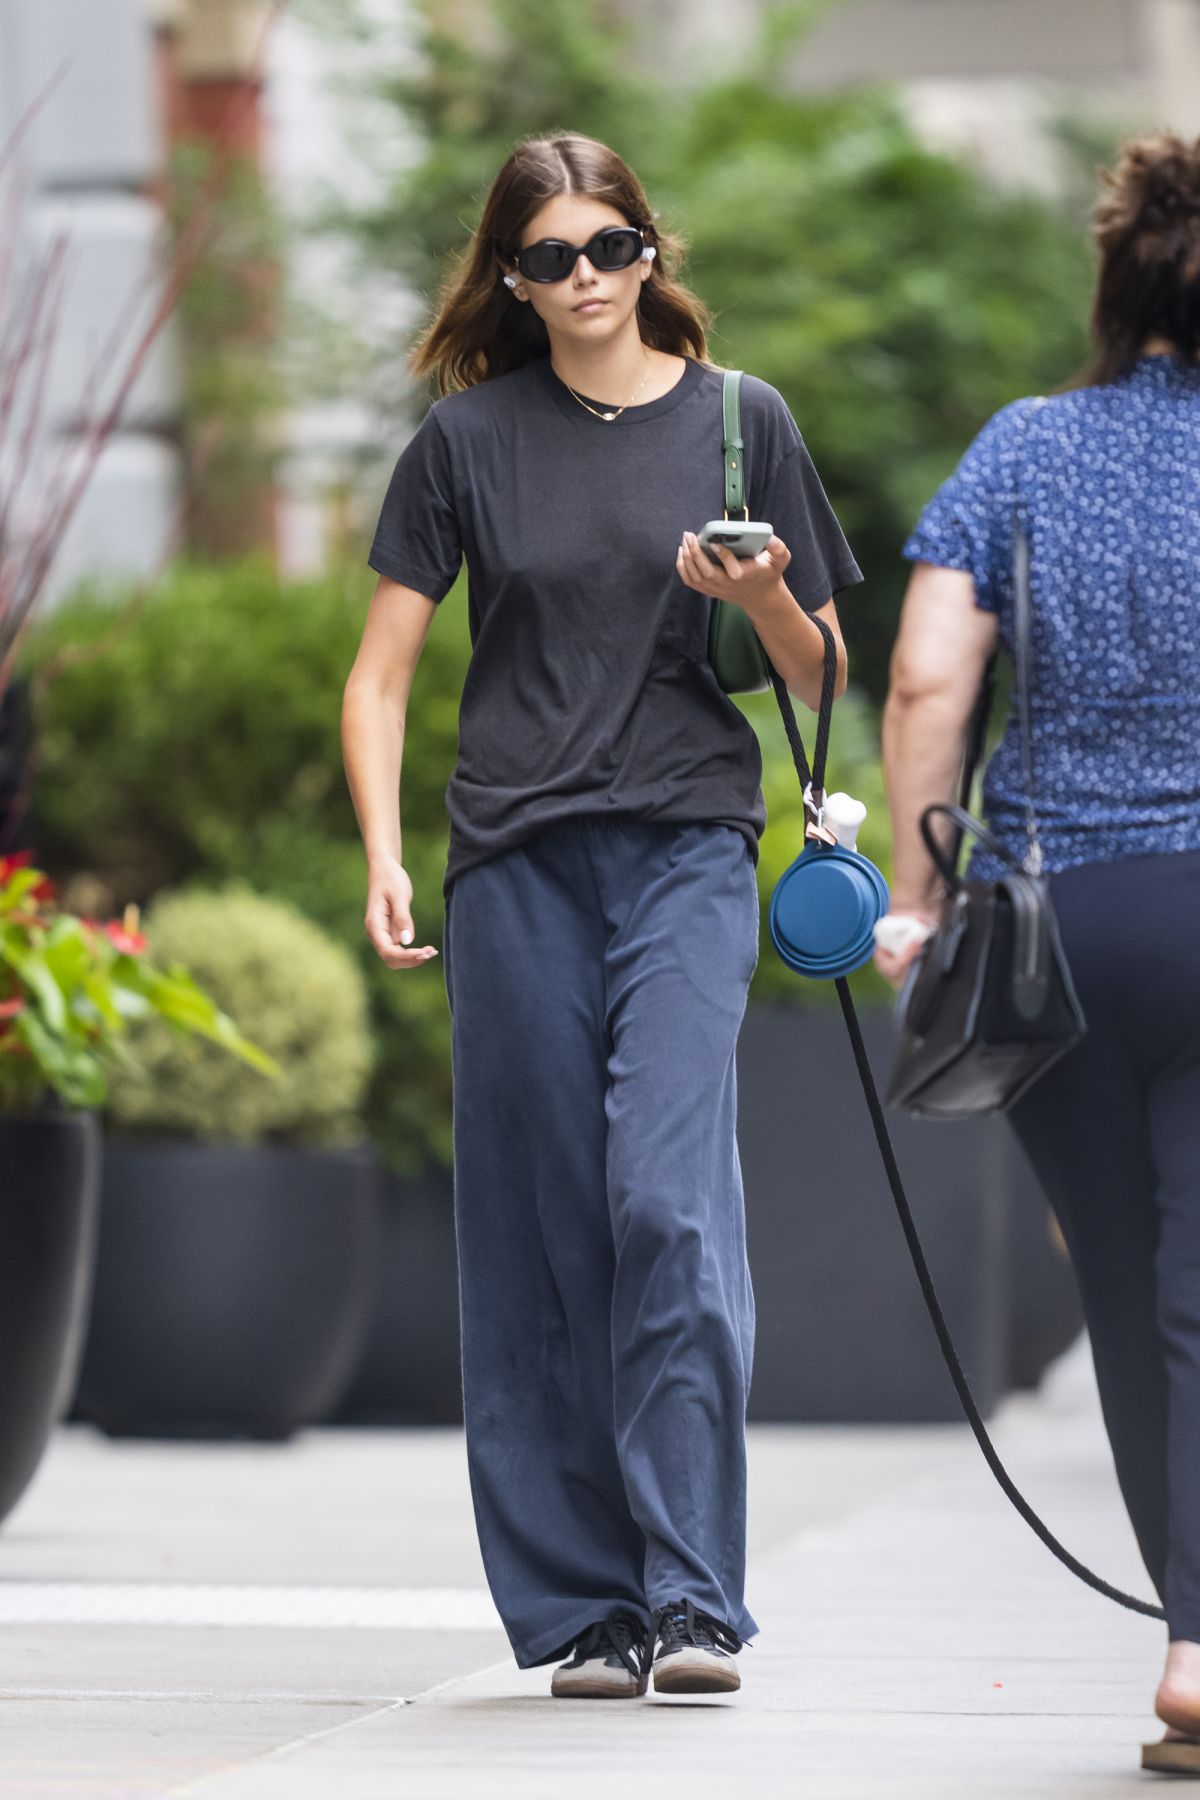 KAIA GERBER Out and About in New York 07/16/2022 – HawtCelebs